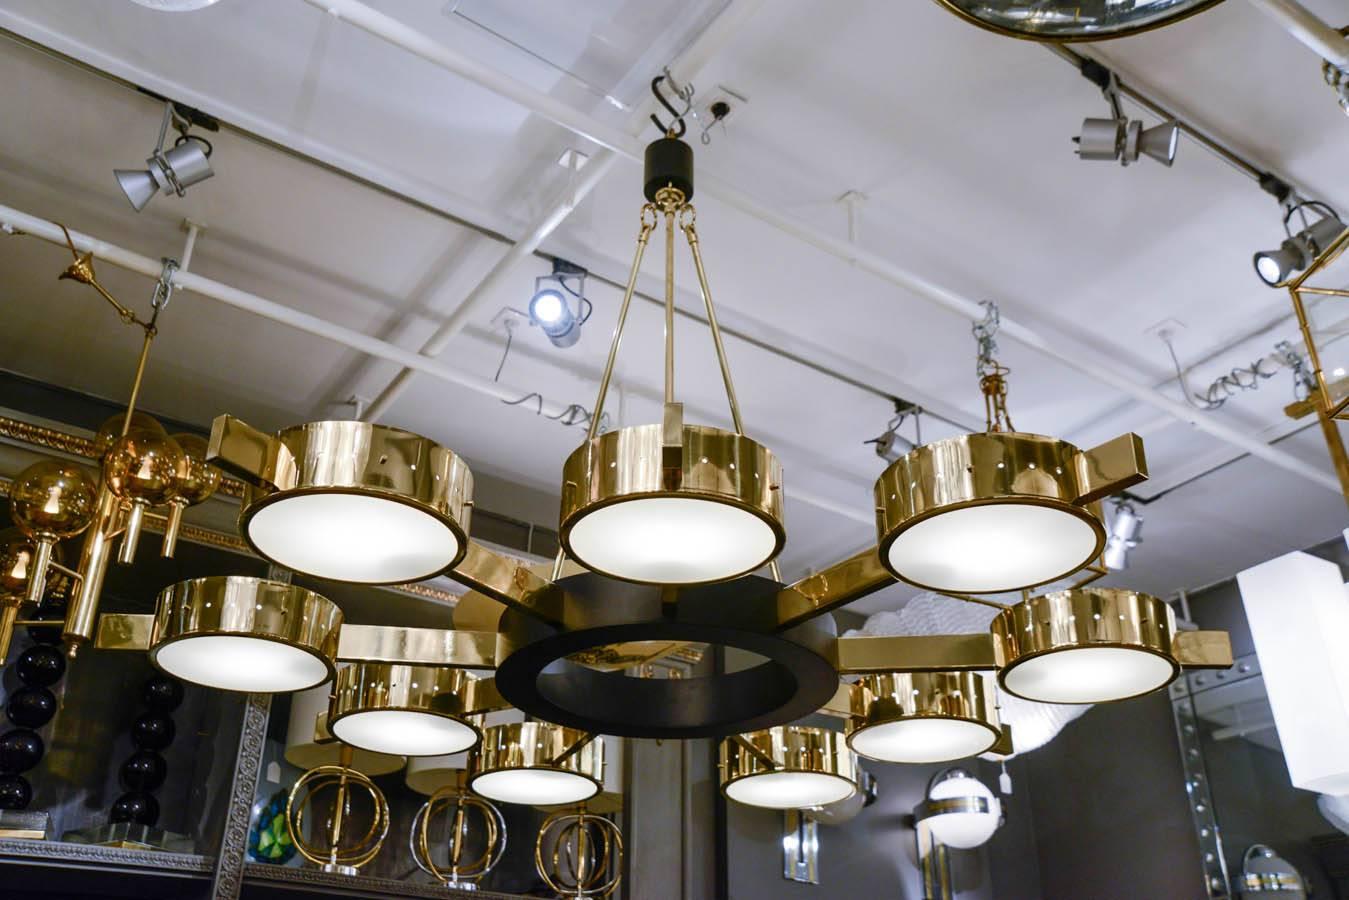 Large chandelier made of black enameled metal and brass, round shaped with nine arms each holding a source of light framed between two discs of glass.

Galerie Glustin Luminaires Creation.